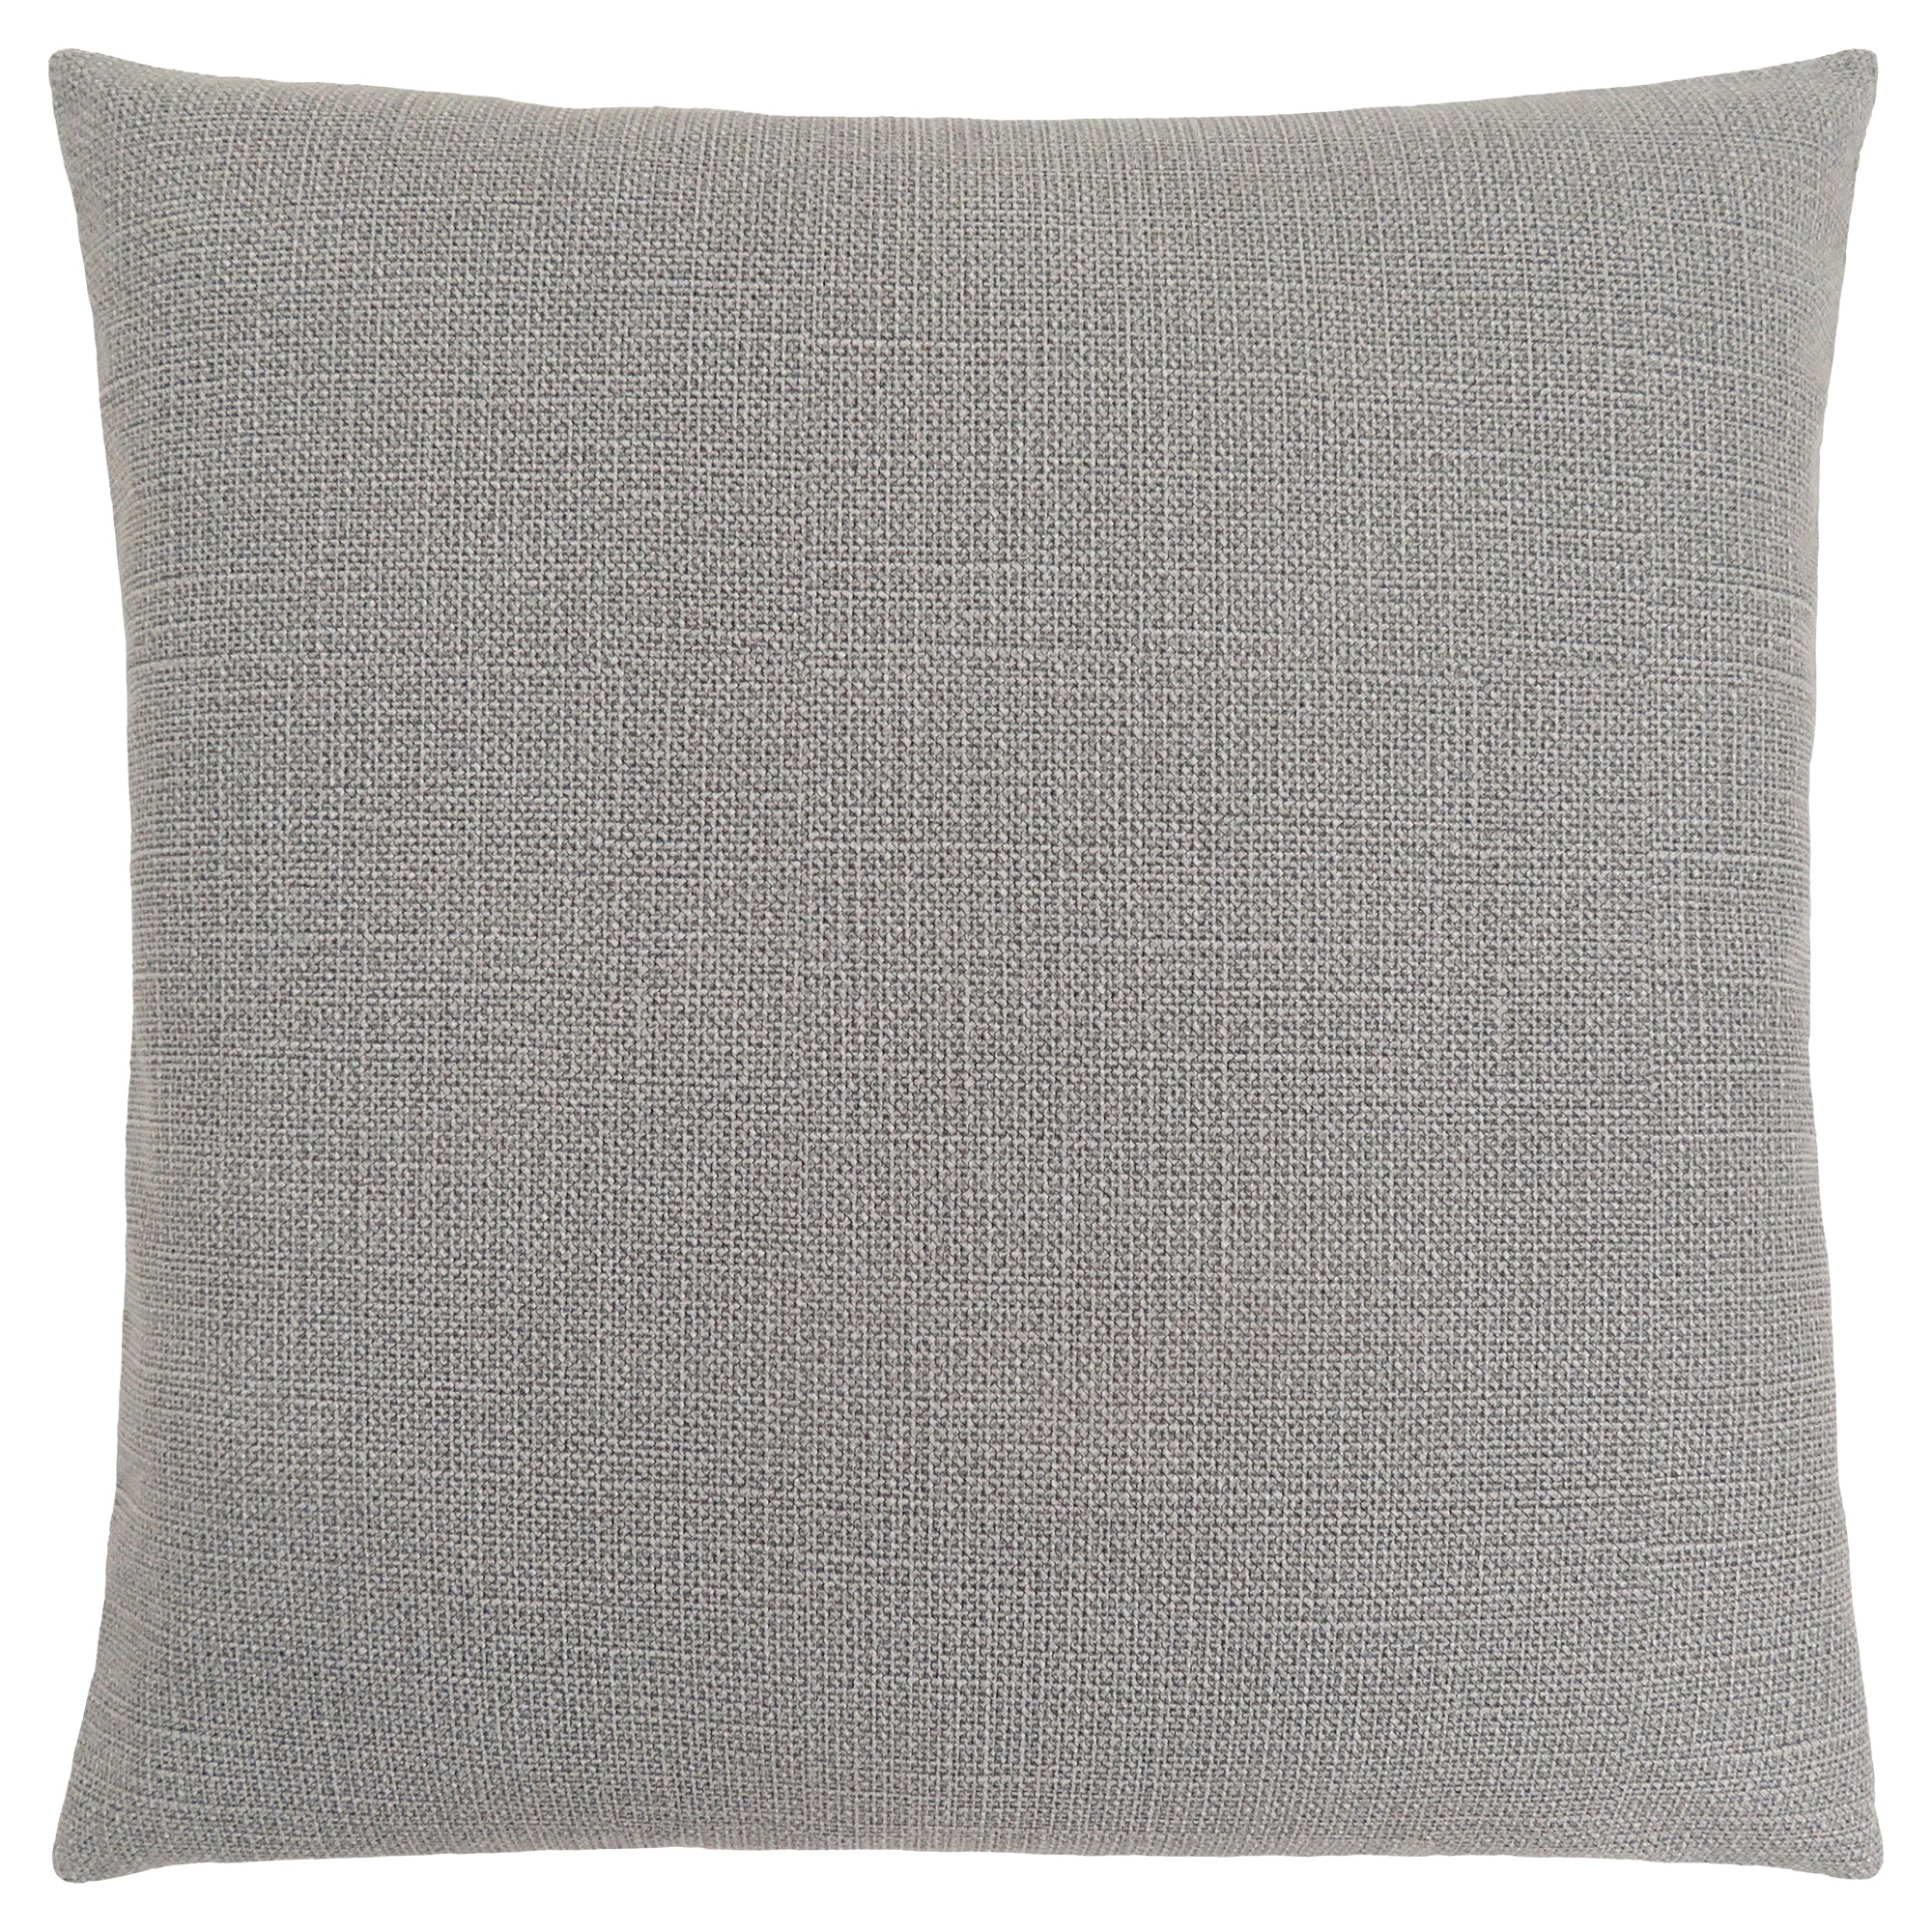 MN-839294    Pillows, 18 X 18 Square, Insert Included, Decorative Throw, Accent, Sofa, Couch, Bed, Cozy Textured-Look, Soft Polyester Fabric, Hypoallergenic Soft Polyester Insert, Light Grey, Classic